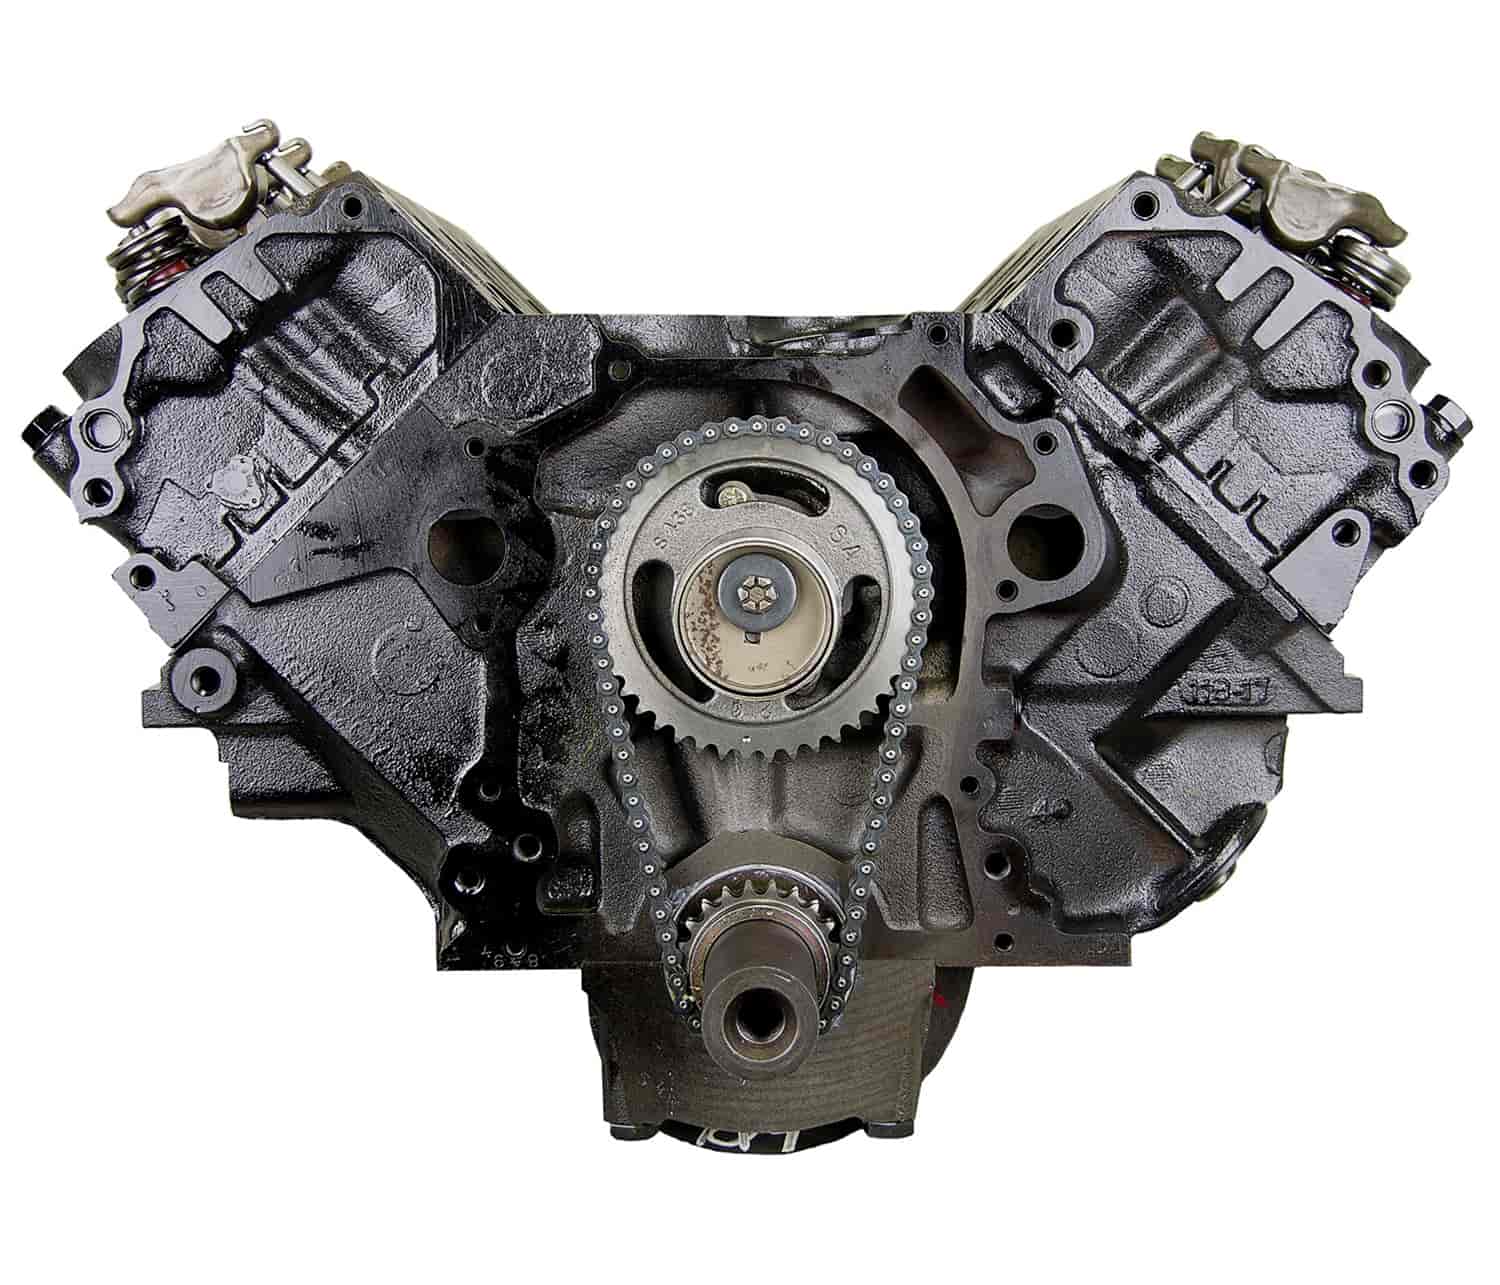 Remanufactured Crate Engine for 1985-1987 Ford Truck with